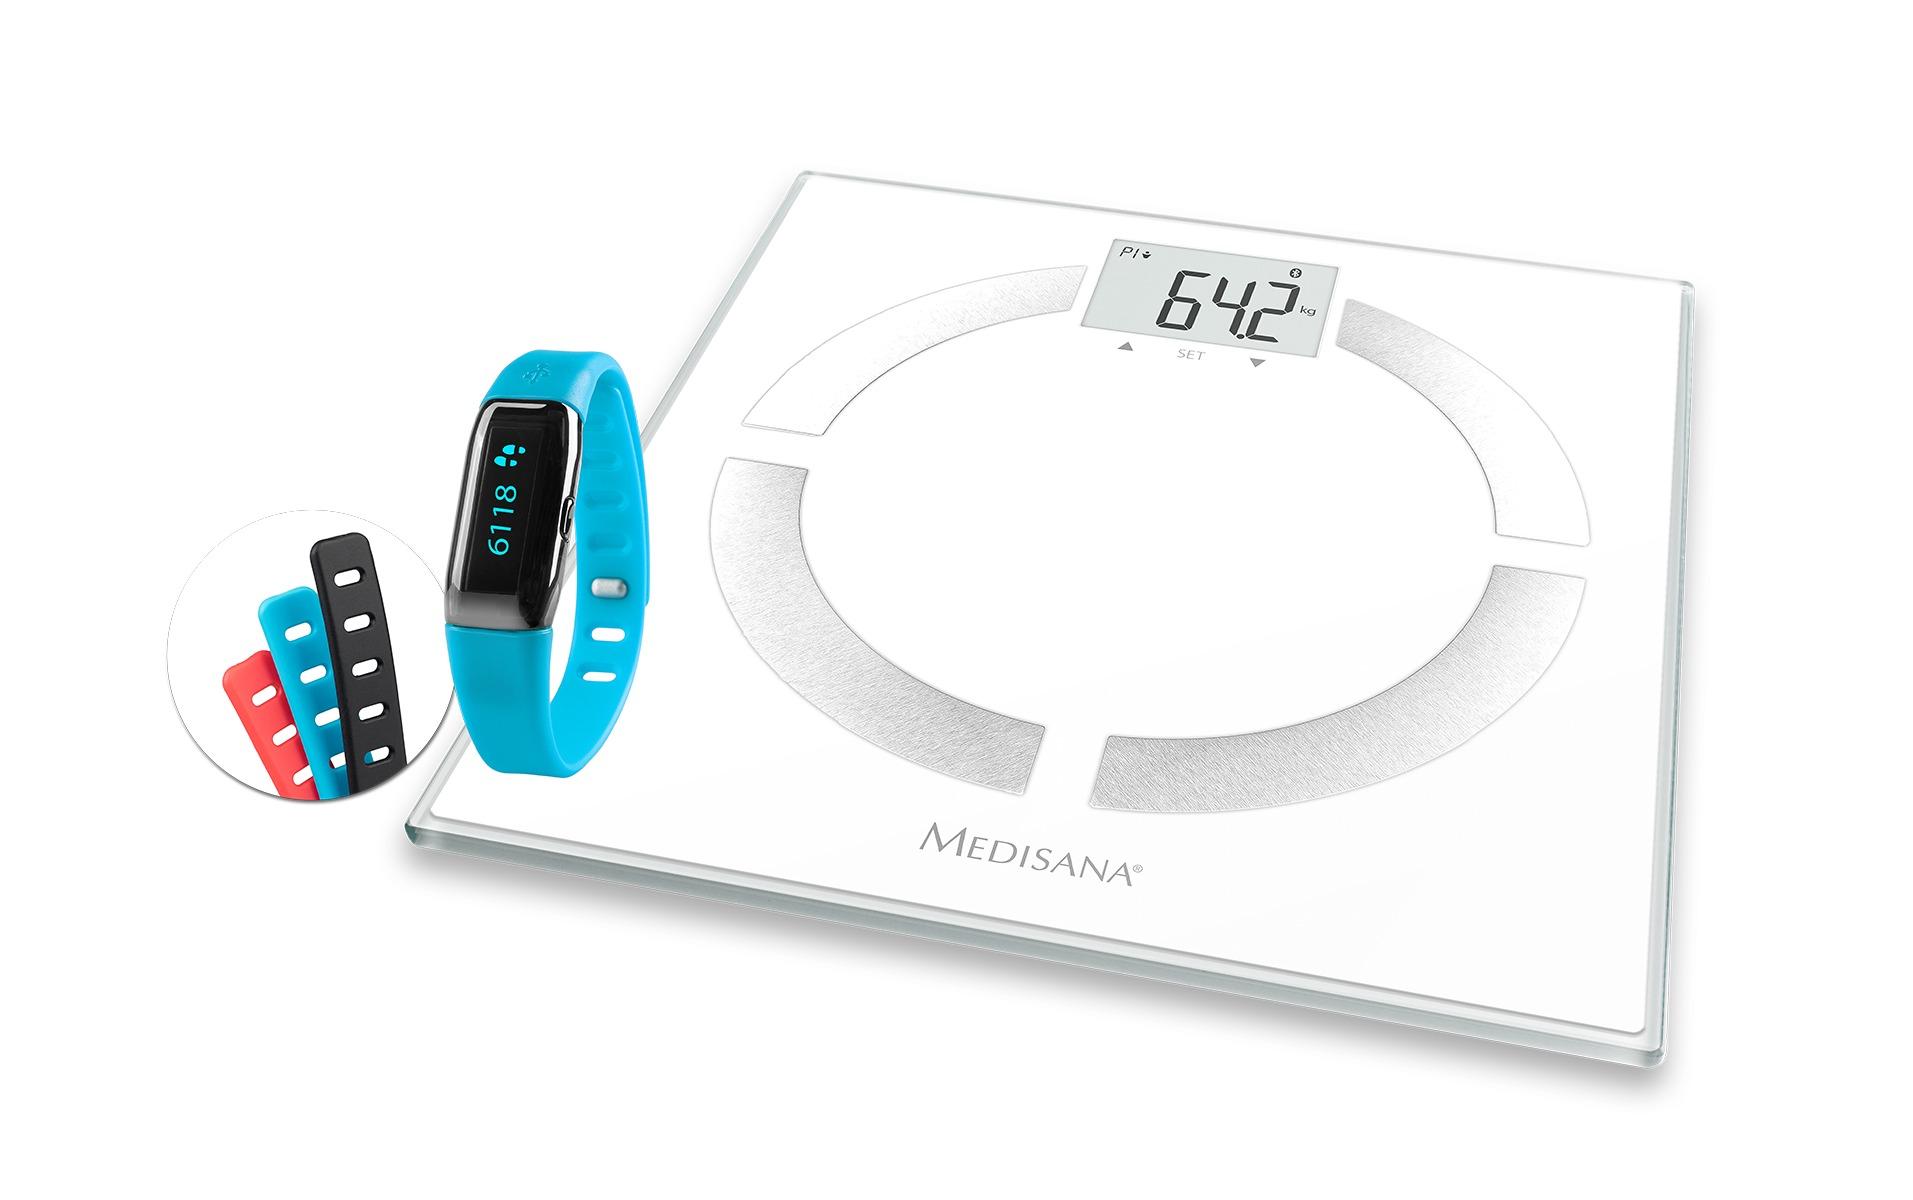 Multifunctional bathroom scale made of high-quality safety glass, combined with the Vifit connect MX3